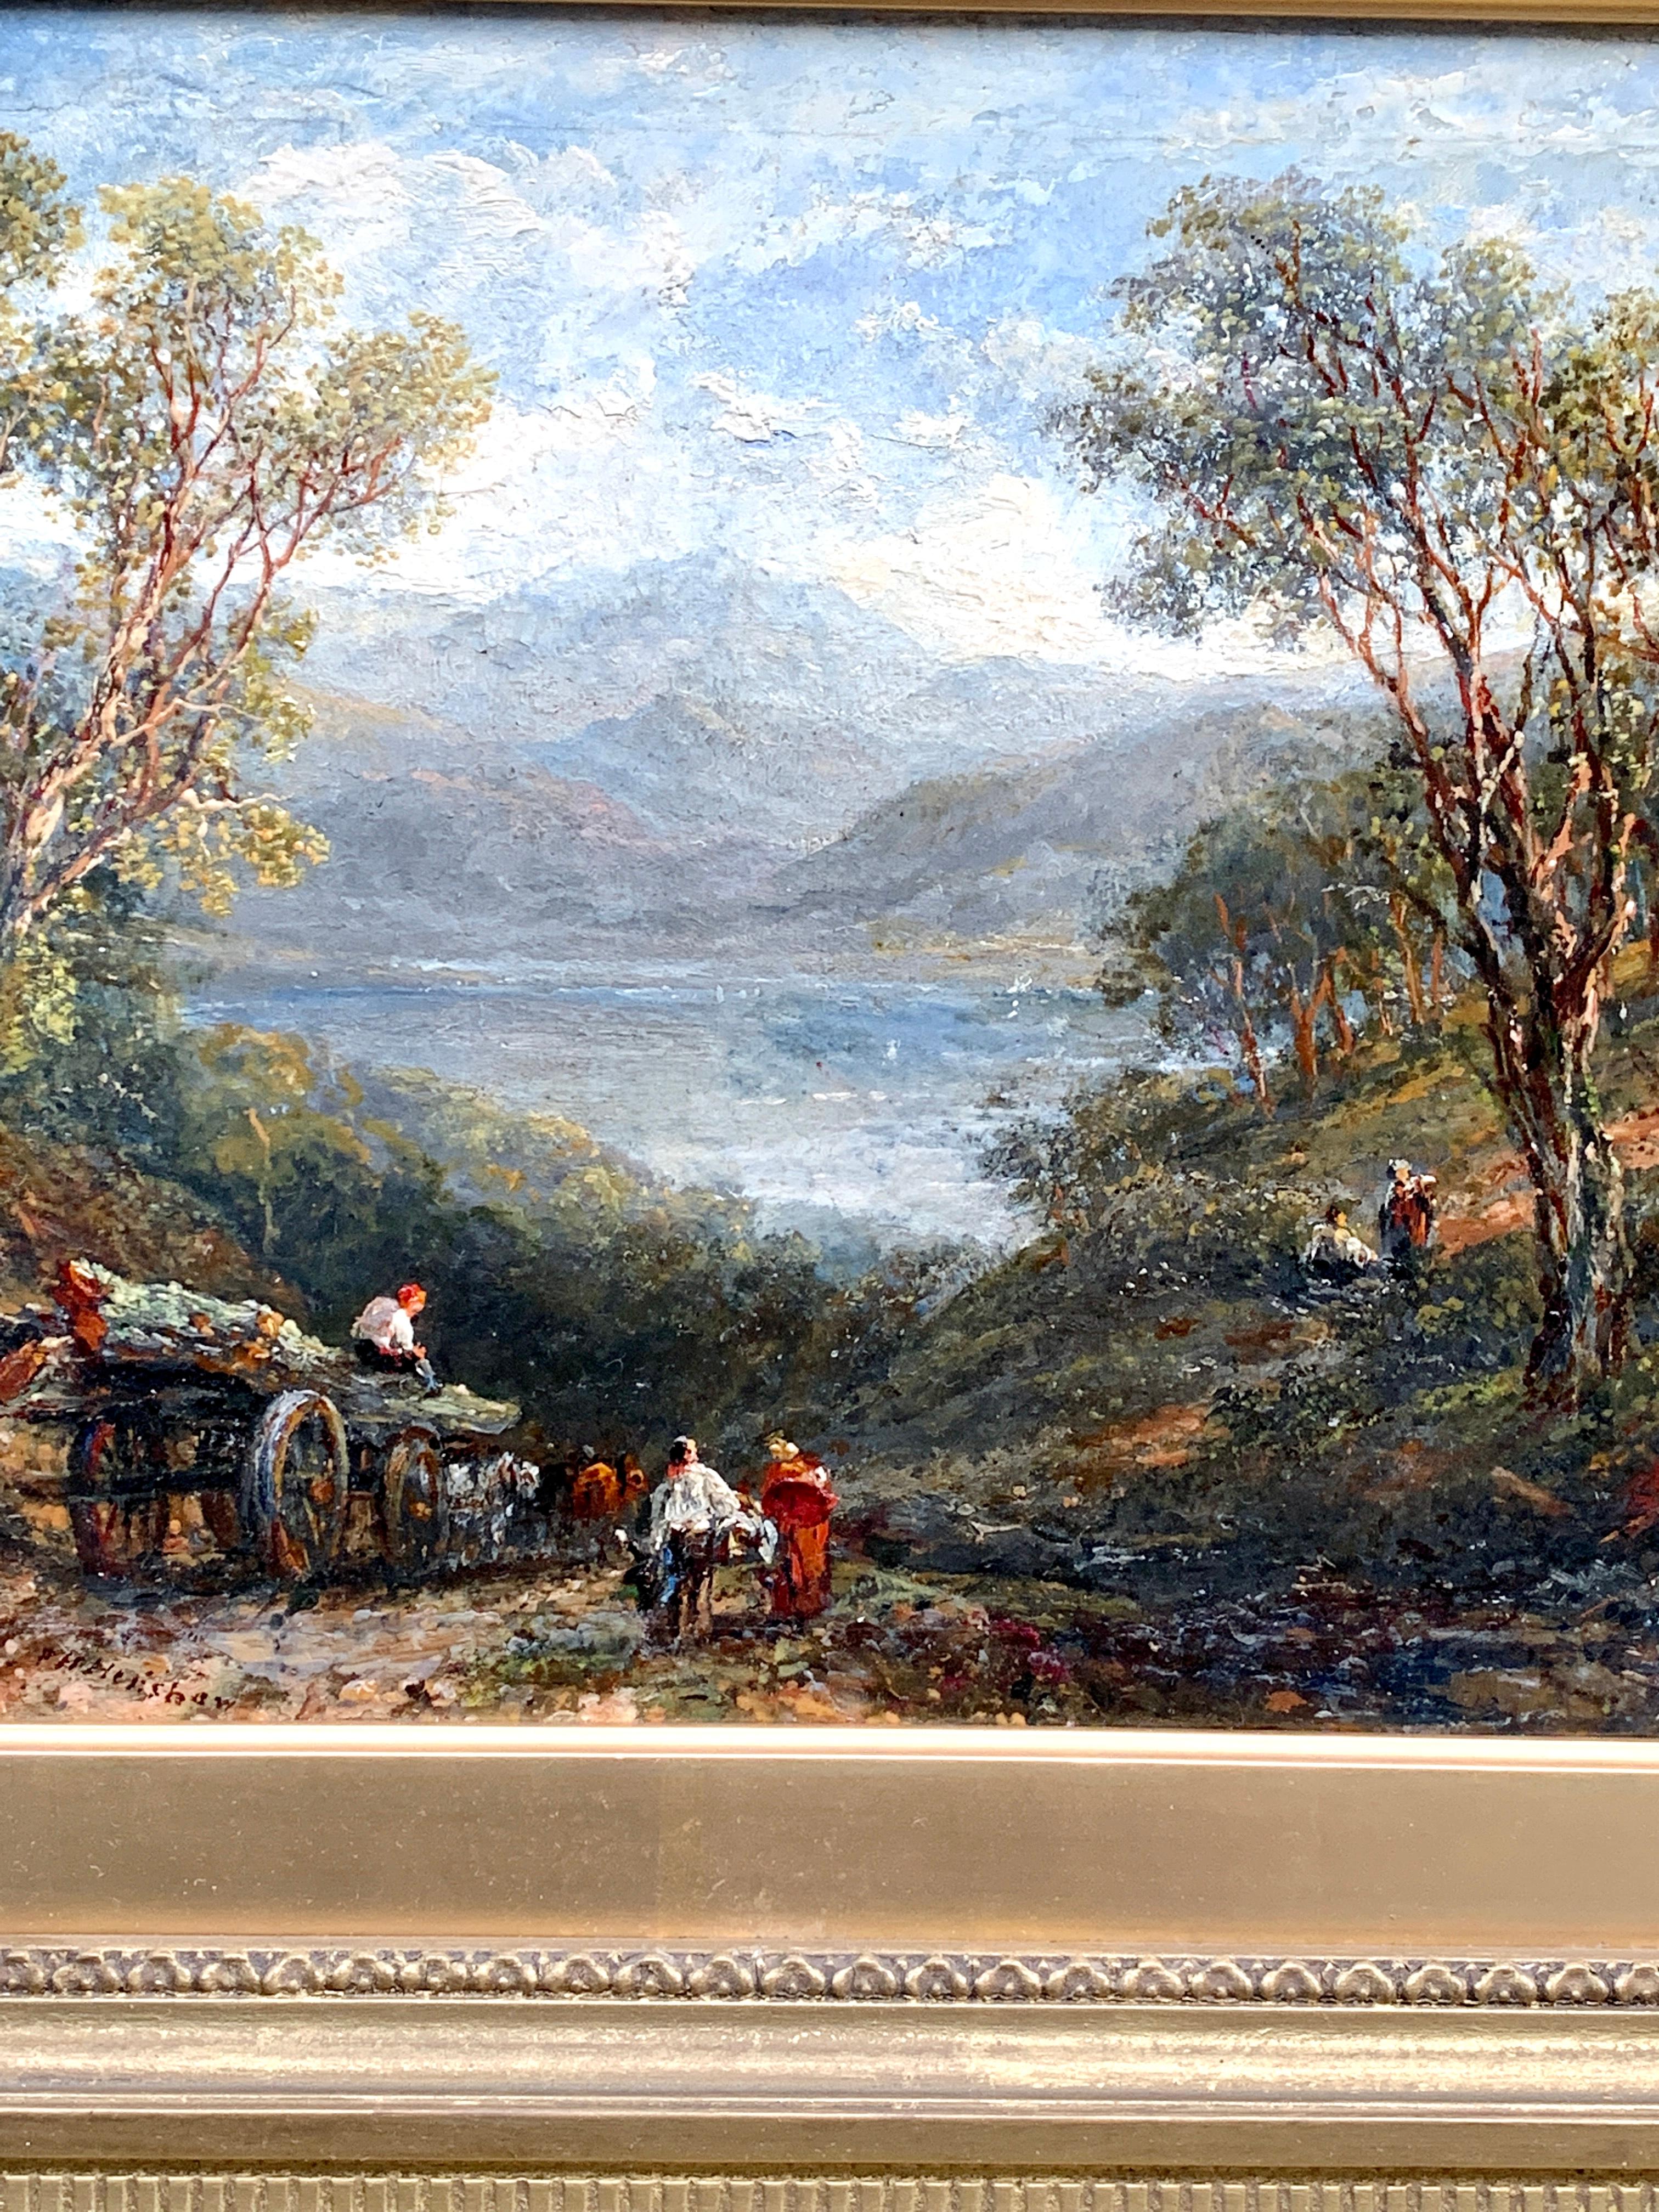 English Antique 19thC wooded landscape with horse and cart, and figures by lake - Painting by Frederick Henry Henshaw